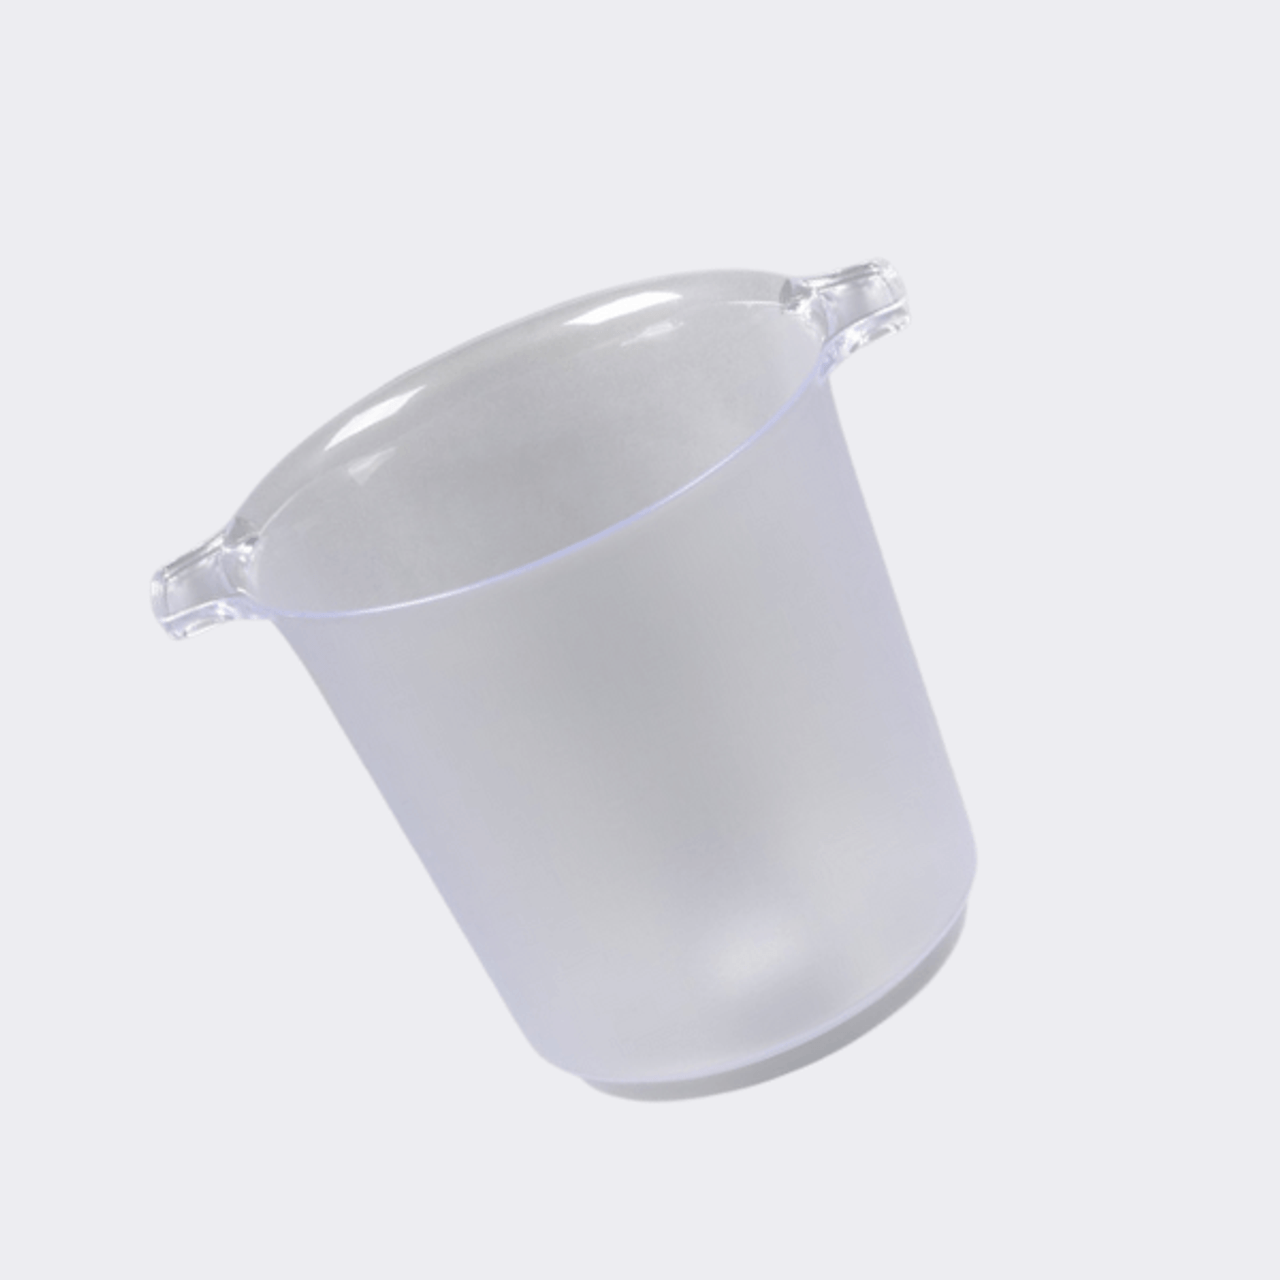 Fineline Platter Pleasers Heavy Duty Disposable Plastic 4 Qt. Wine / Champagne Chiller Ice Bucket. CHICKEN PIECES.